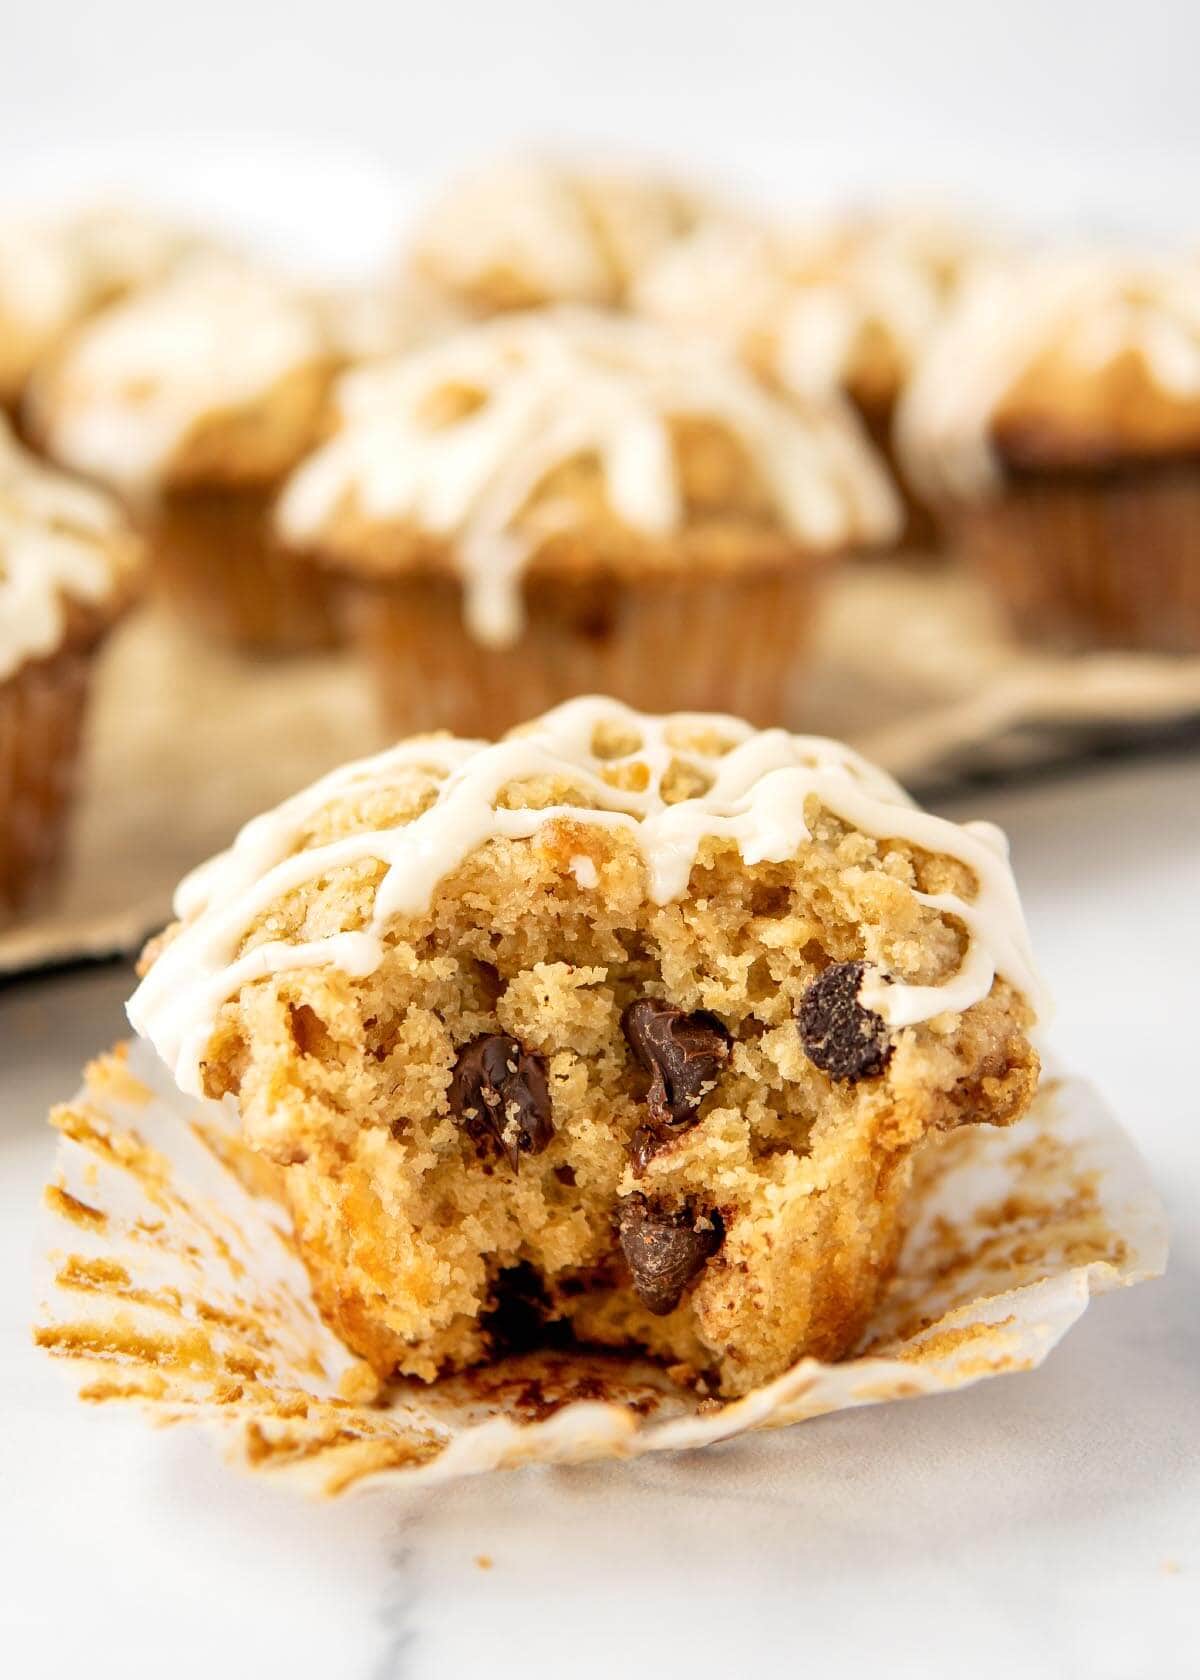 Oatmeal Chocolate Chip Muffin with a bite out of it